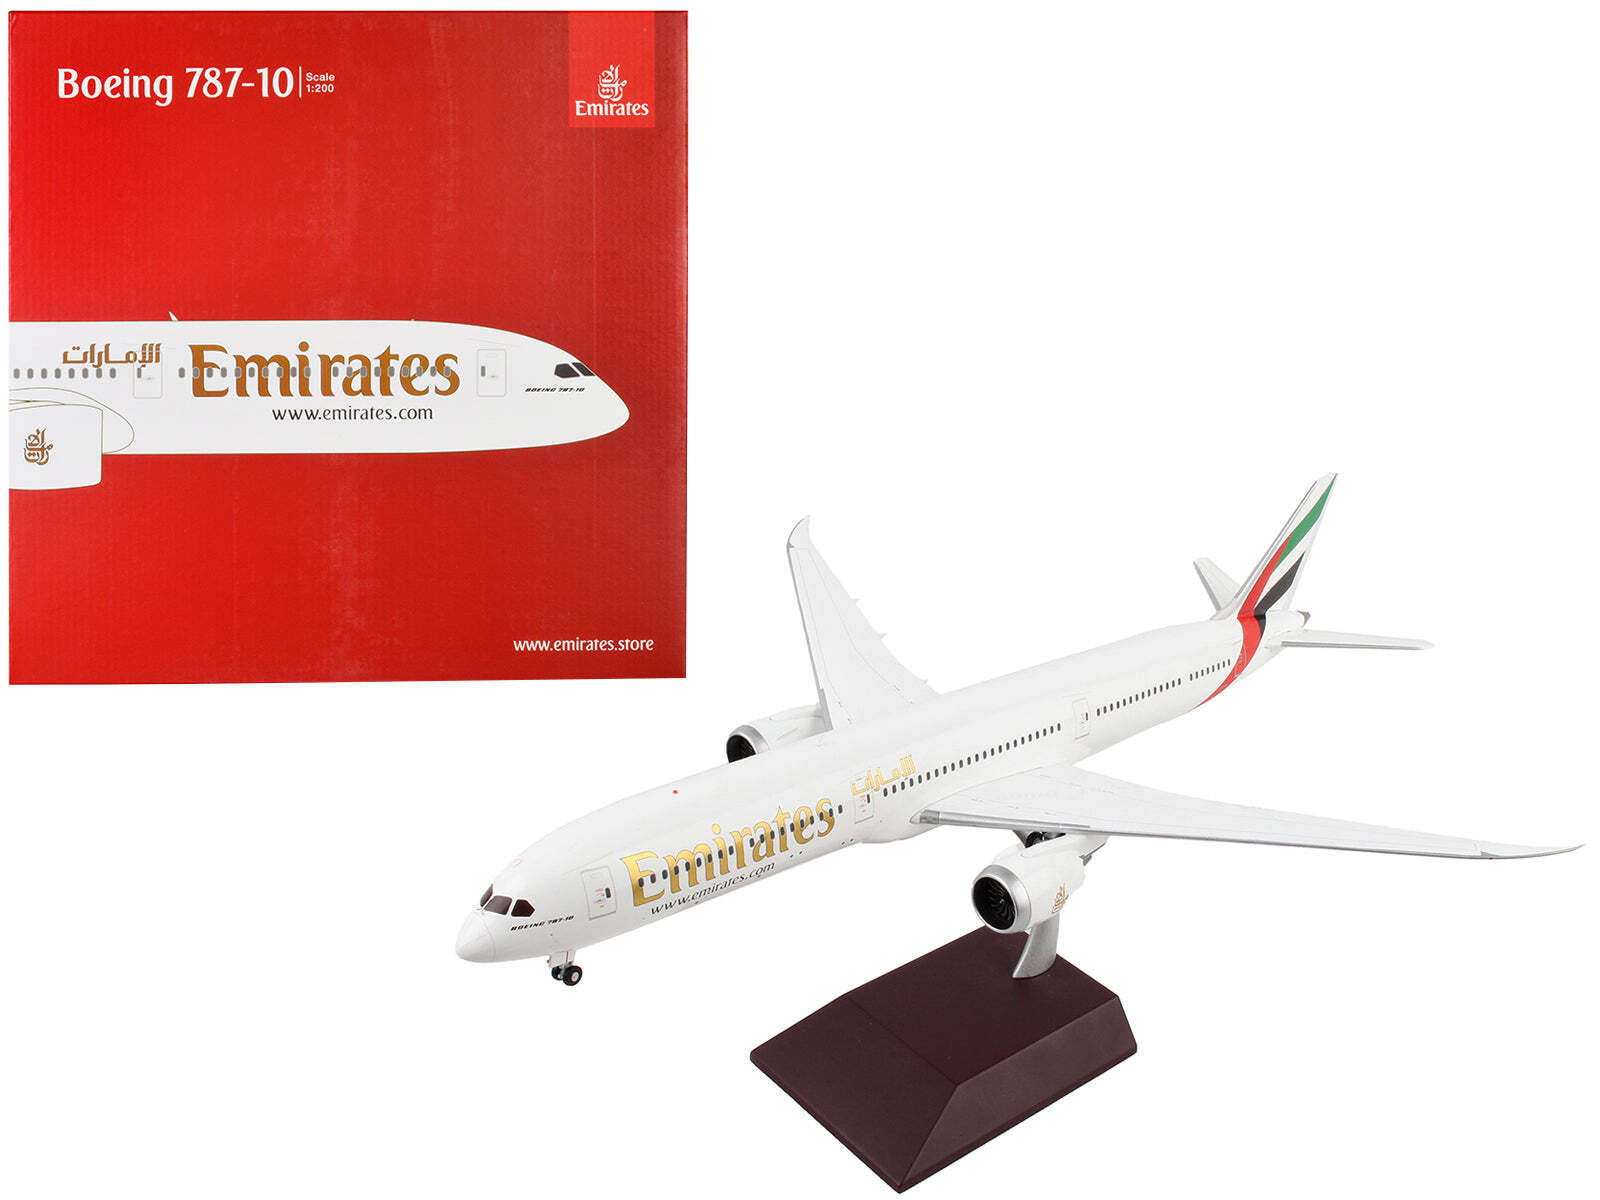 Boeing 787-10 Commercial Emirates Airlines Striped 1/200 Diecast Model Airplane